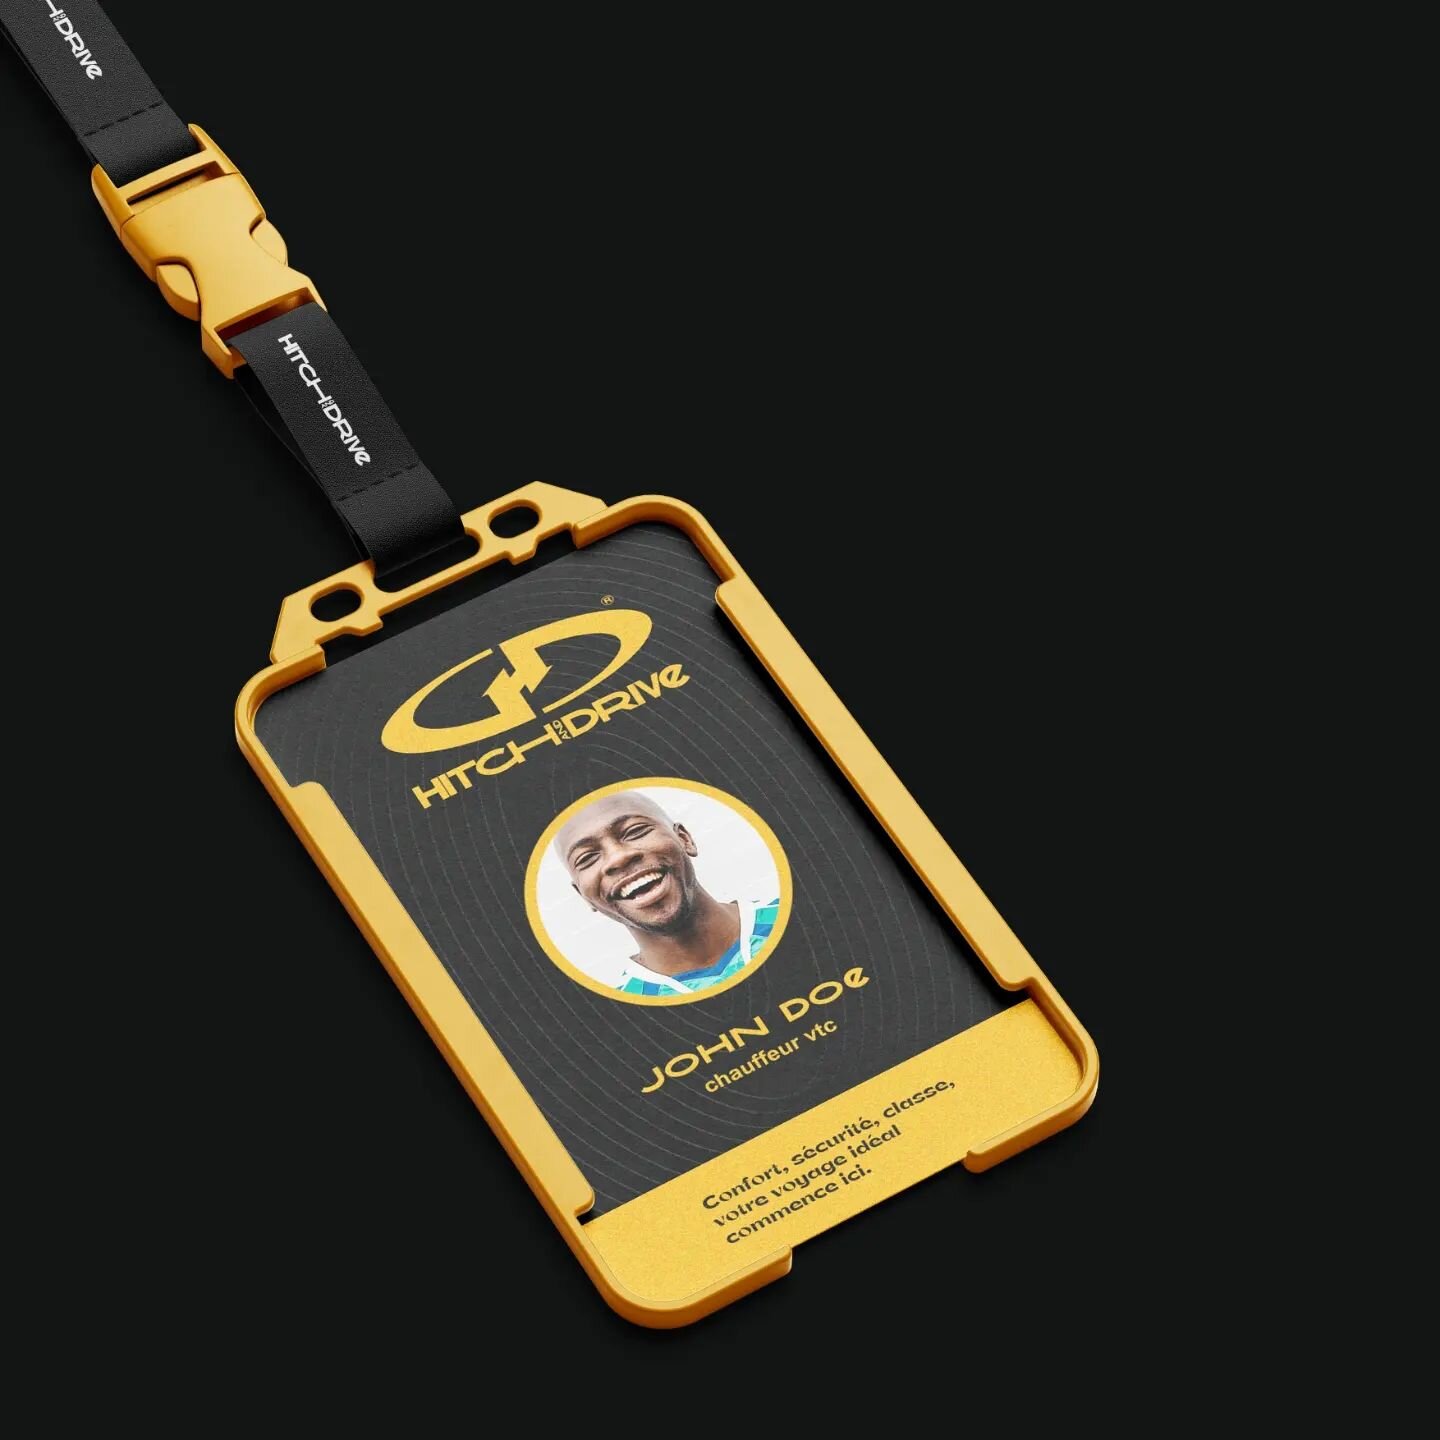 Kingz Agency [ Works / ID badge Design &copy;2023 ] Designer c/d Djalale-dine&trade; ~ ID badge for Hitch And Drive.

Une id&eacute;e, un projet, une question ? Contactez-nous !

.
.
.
.

..
.
.
.

.
.
.
.

.
.
.
.
.
.
.
.
.
.
.
.
.
.

#KingzAgency #